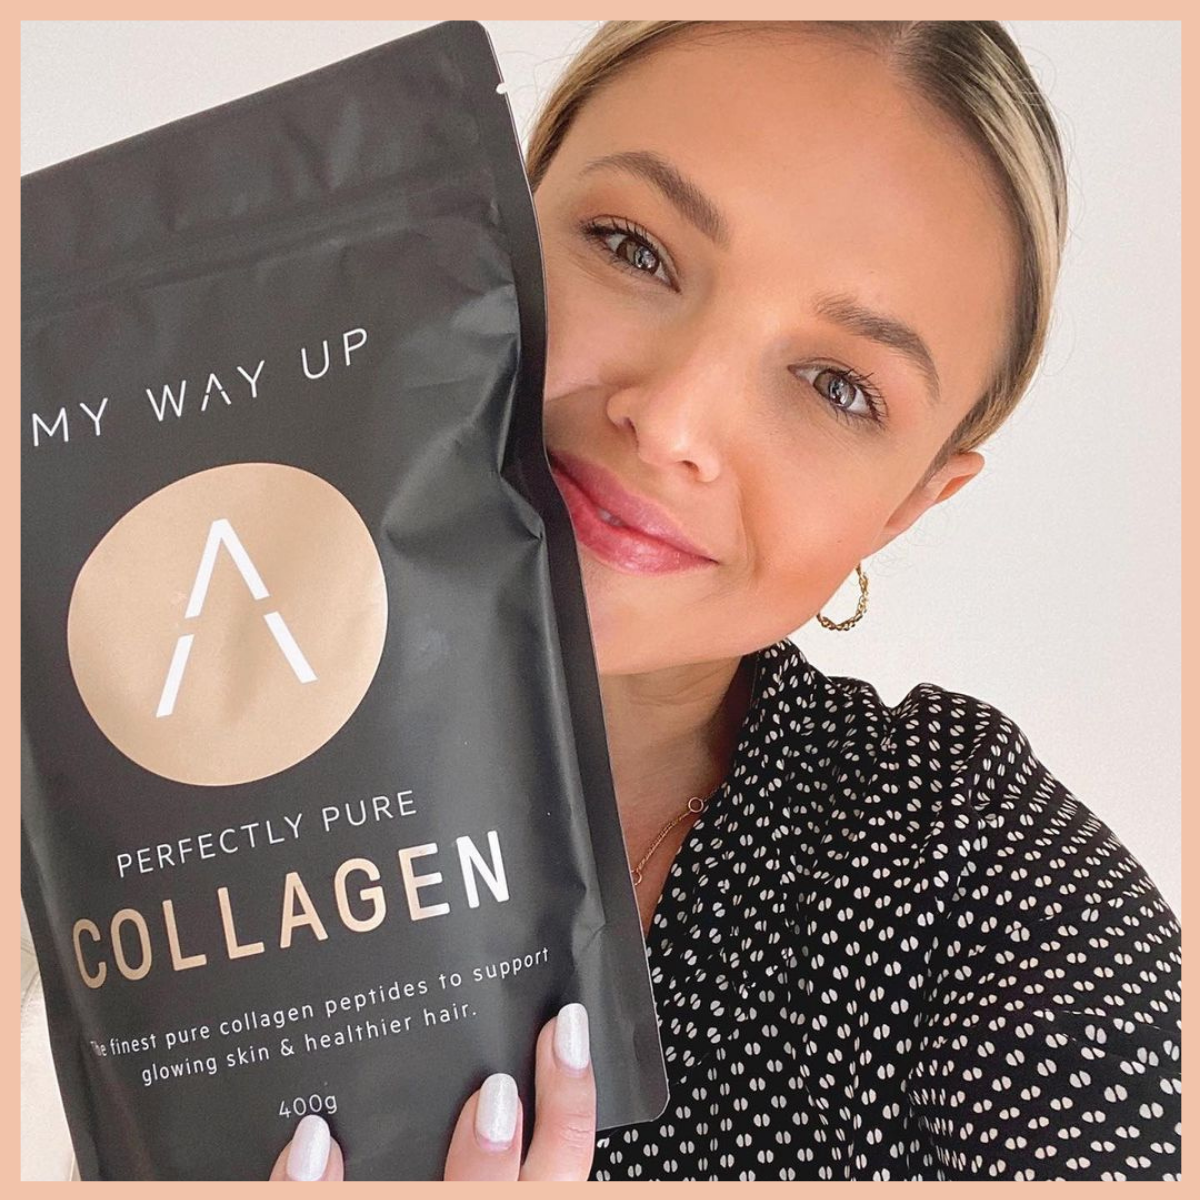 MY WAY UP PERFECTLY PURE COLLAGEN